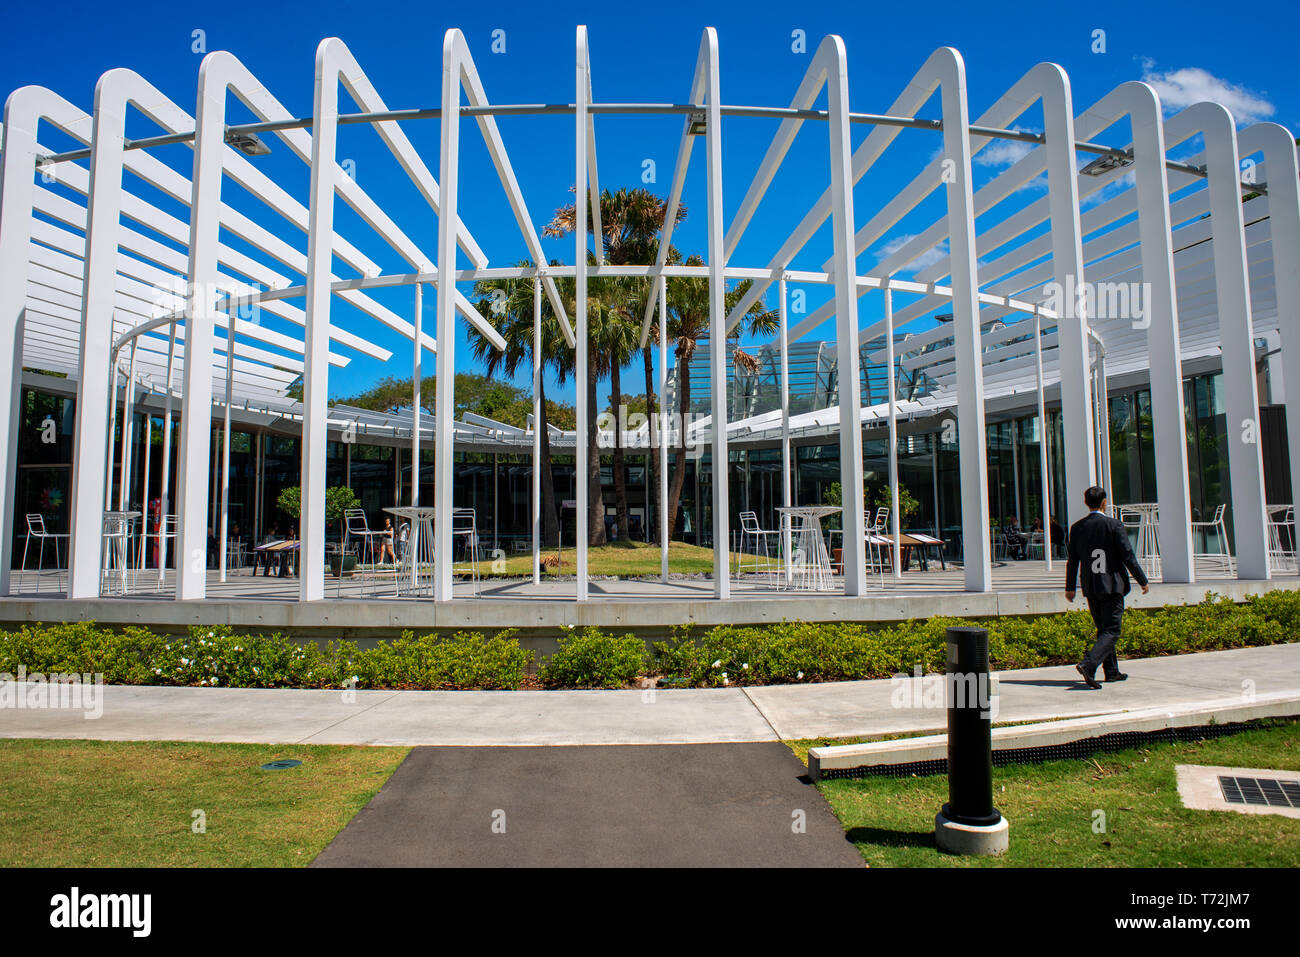 The Calyx building at the Royal Botanic Gardens with people relaxing in the gardens in Sydney, Australia Stock Photo